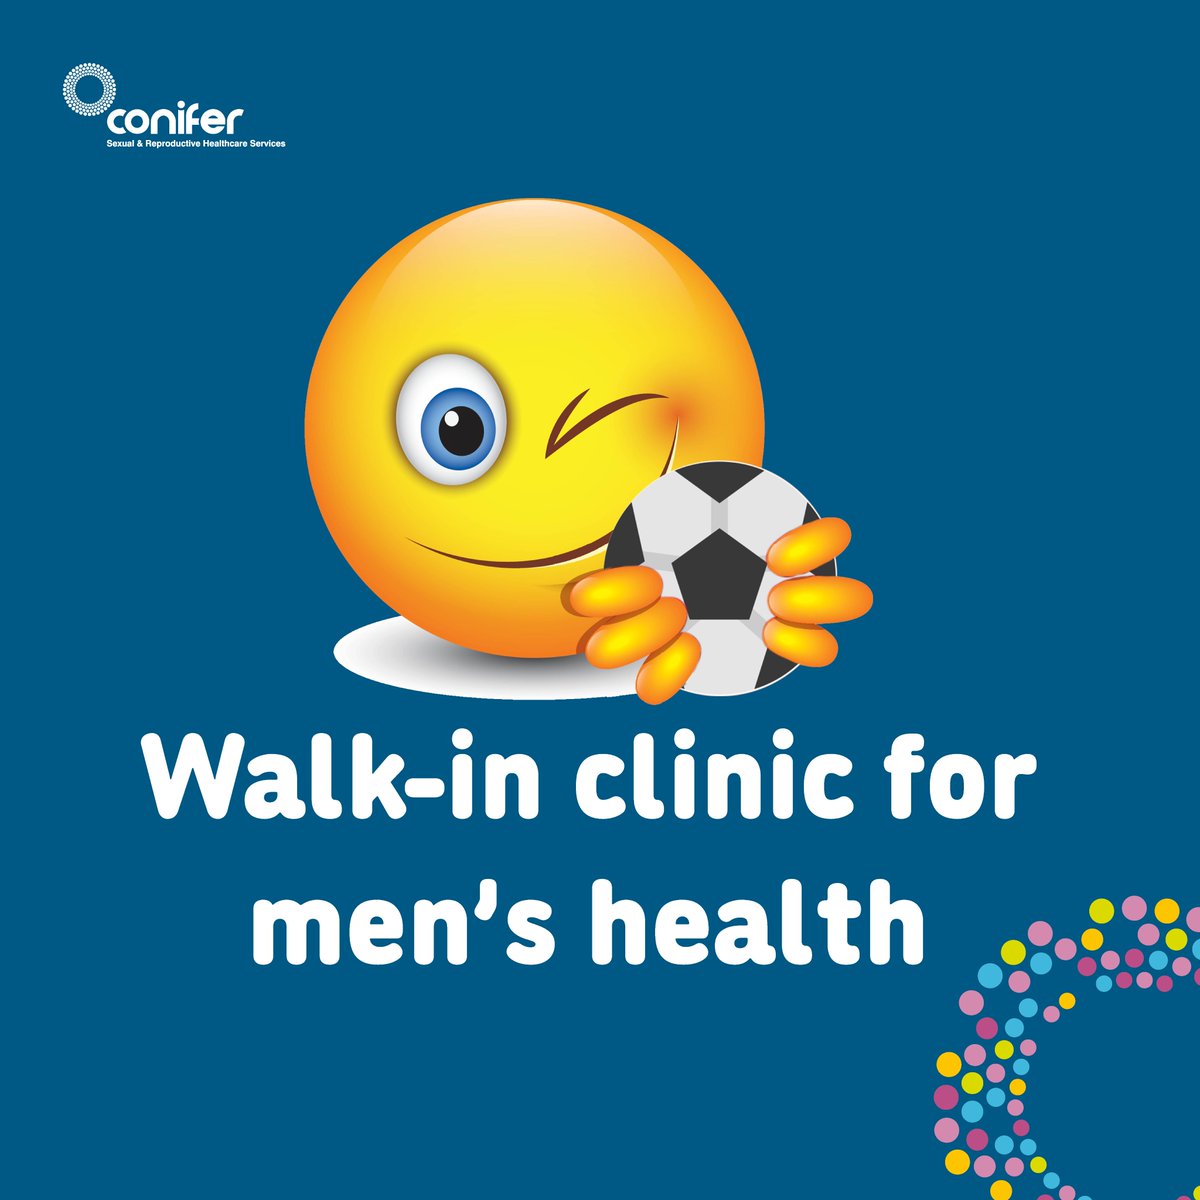 Walk-in clinic for men, Wednesday 14th June 4.30pm – 6pm Bridlington & District Hospital, Bridlington, YO16 4QP.  Walk- in, no appointment needed for STI testing, condoms, also information around testicular examinations and erectile dysfunction.  #conifersexhealth #MensHealthWeek